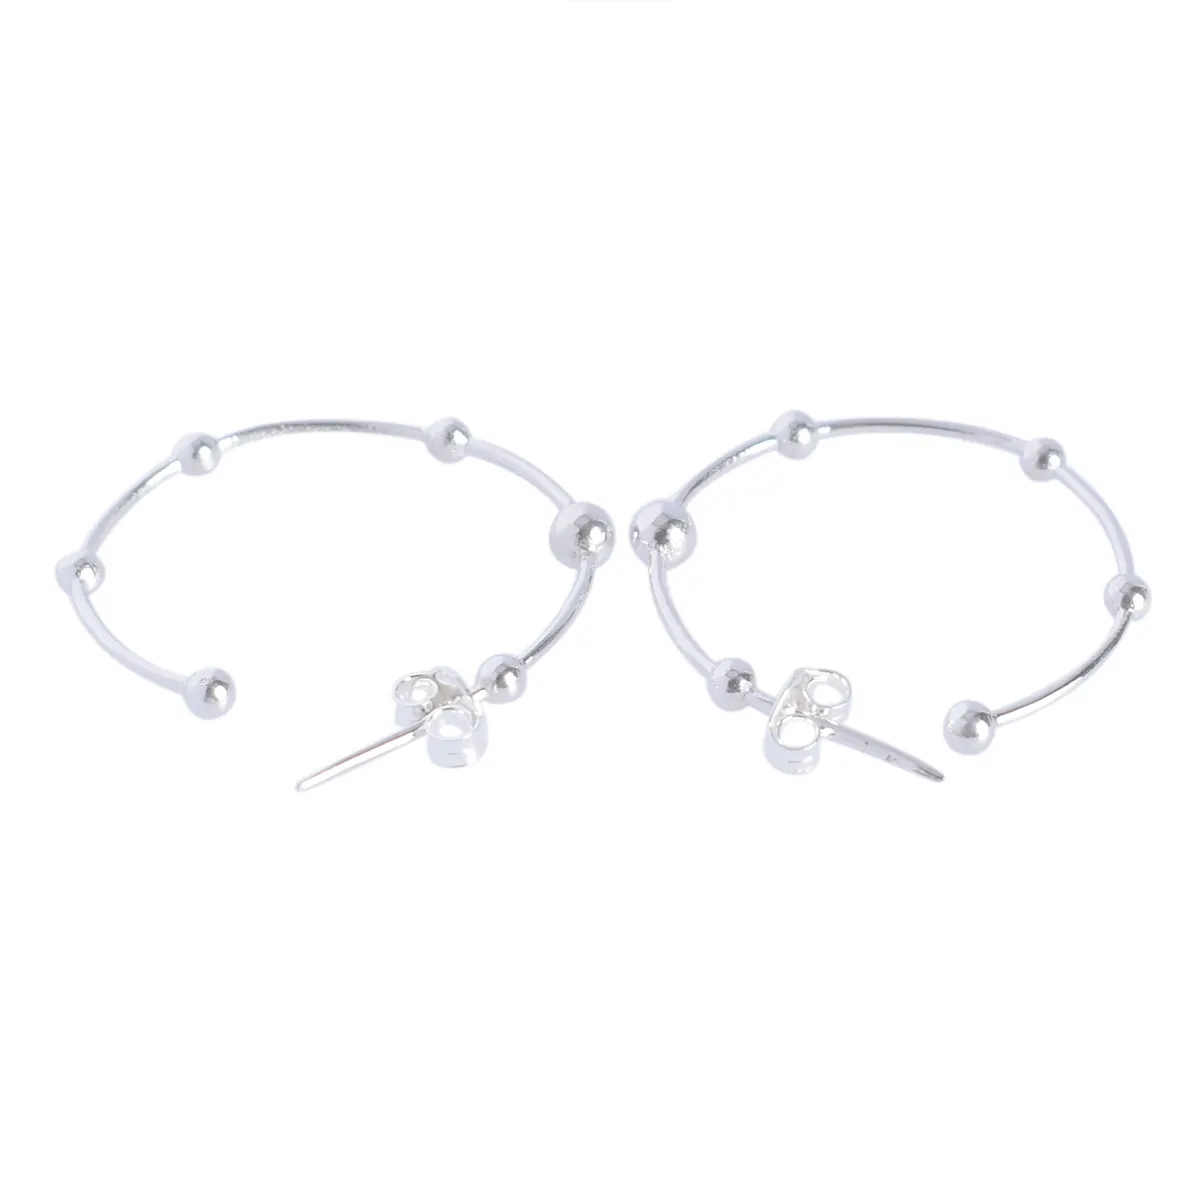 Solid 925 Sterling Silver Plain Hoop Earrings Top Wholesaler Latest Collection Fine Jewelry in Lowest Price Manufacturer